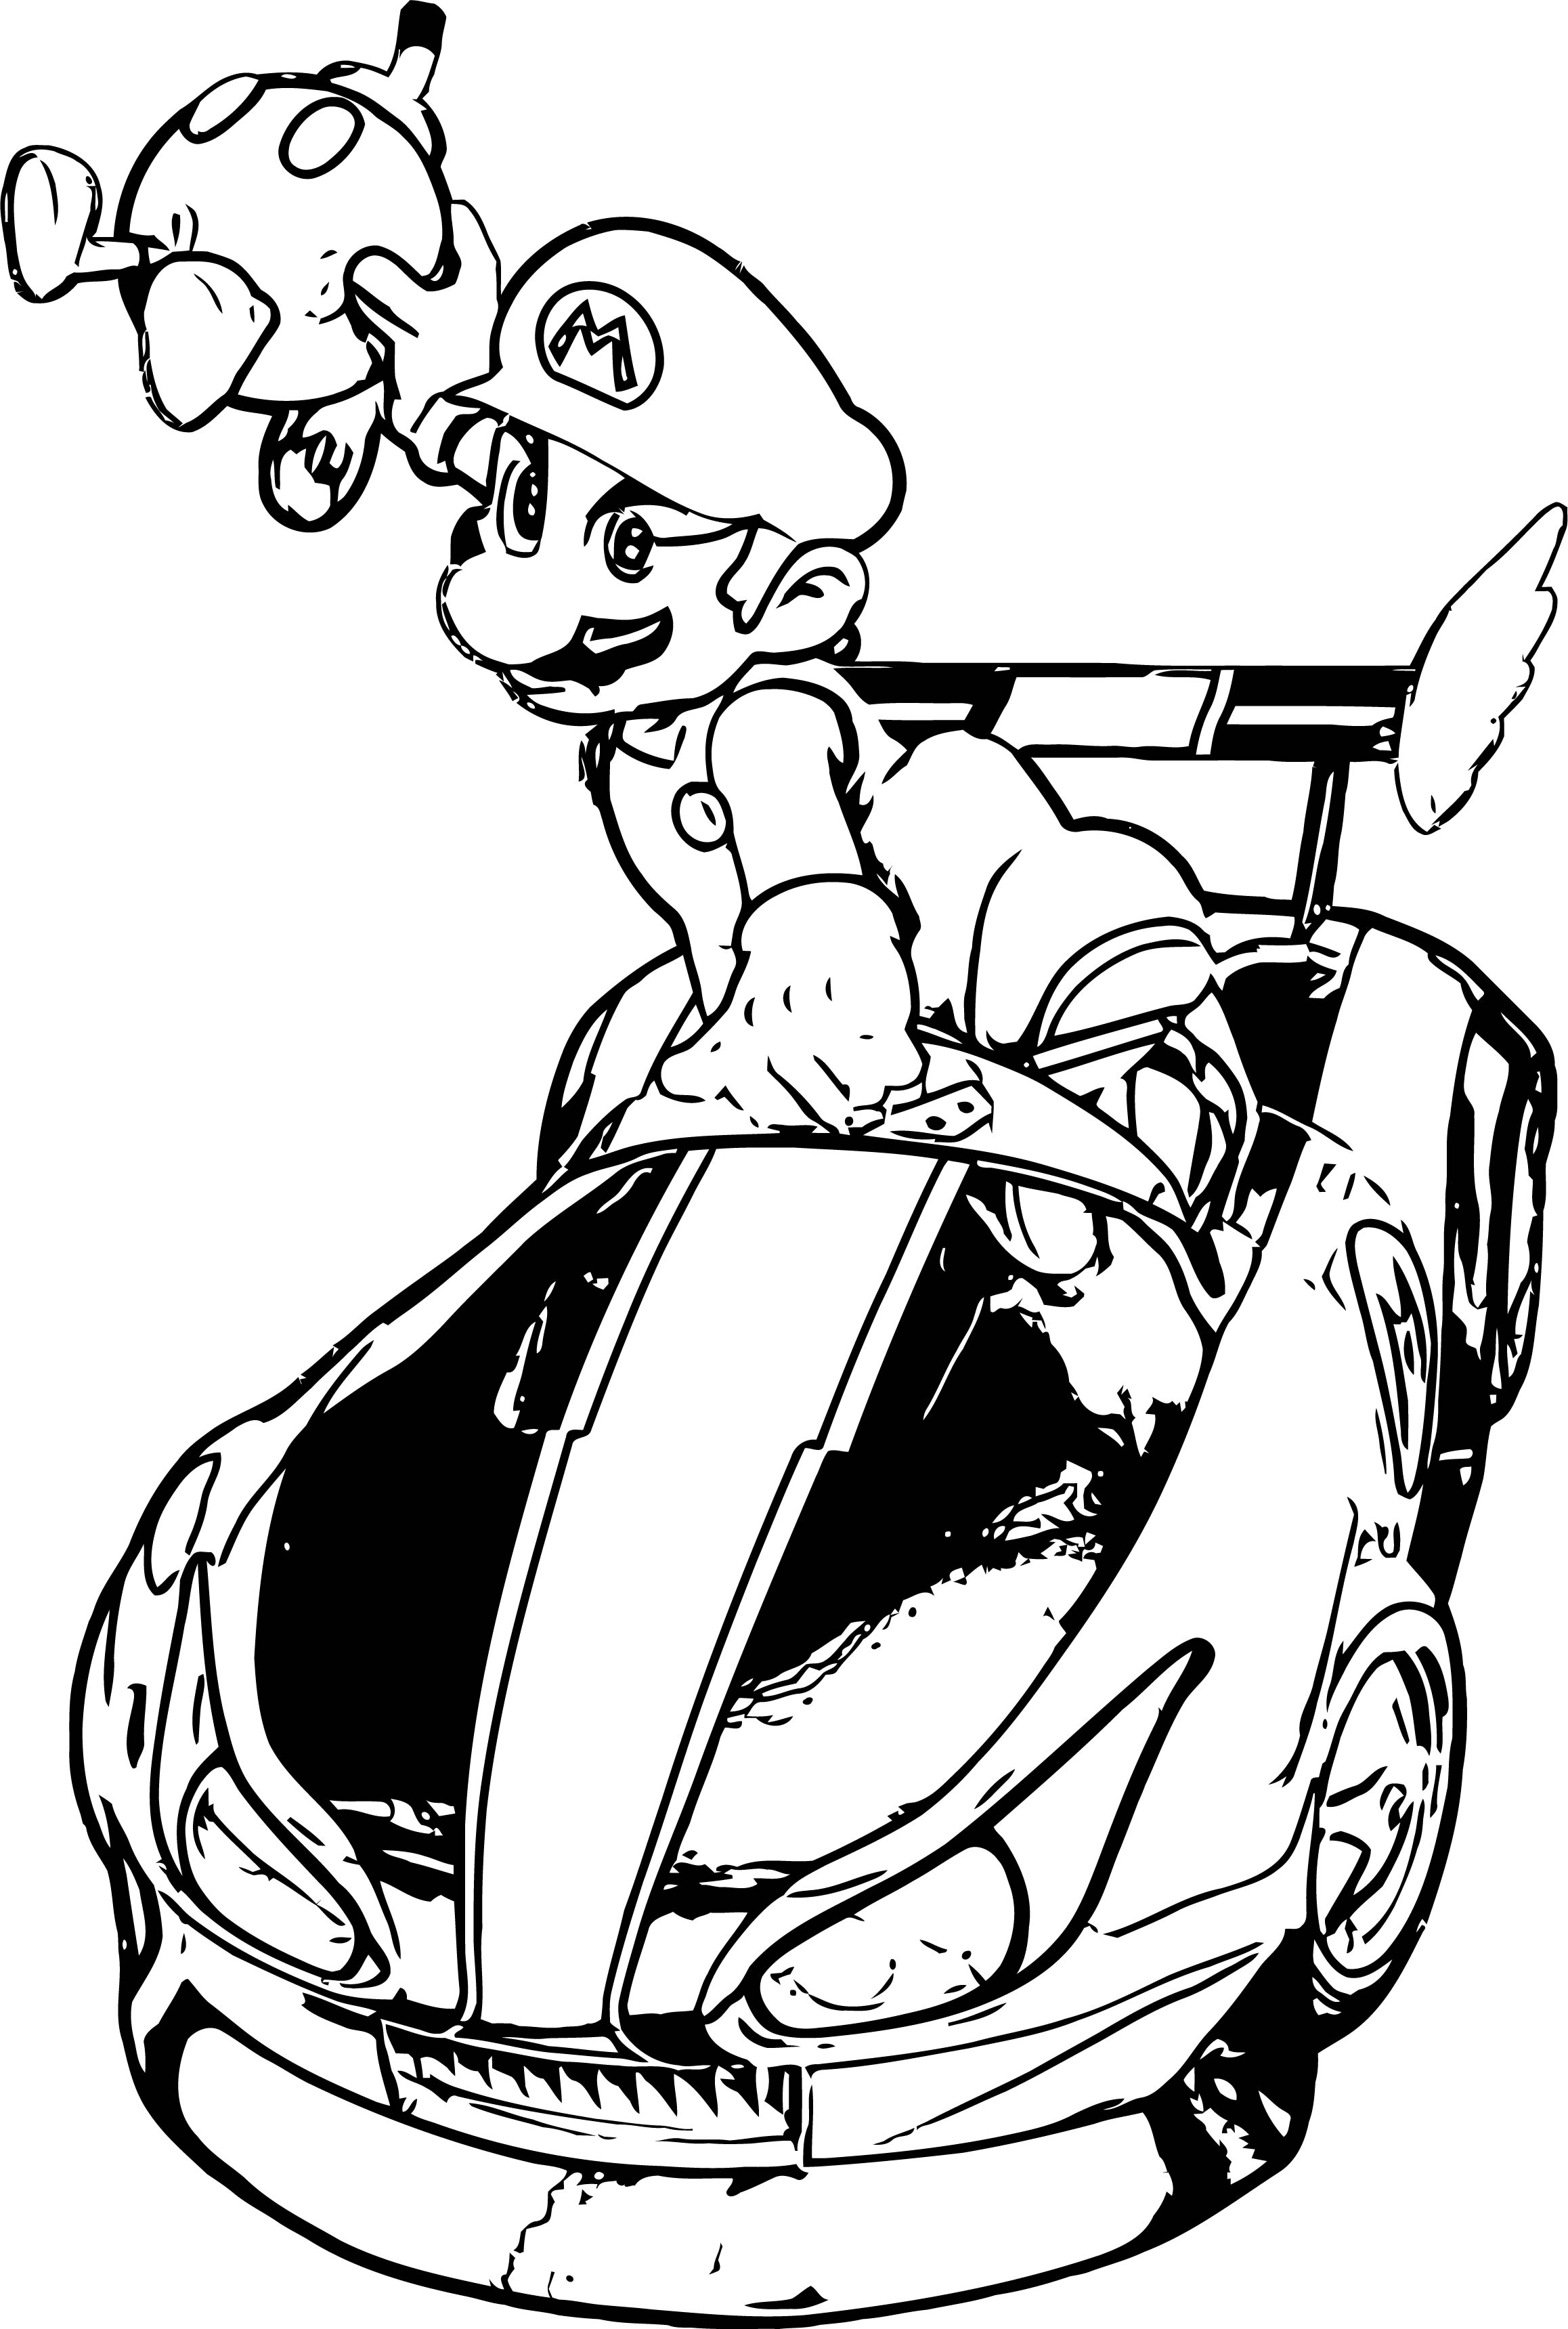 coloring pages of mario kart wii 49 mario kart 7 coloring pages super mario bros bowser coloring wii pages kart mario of 